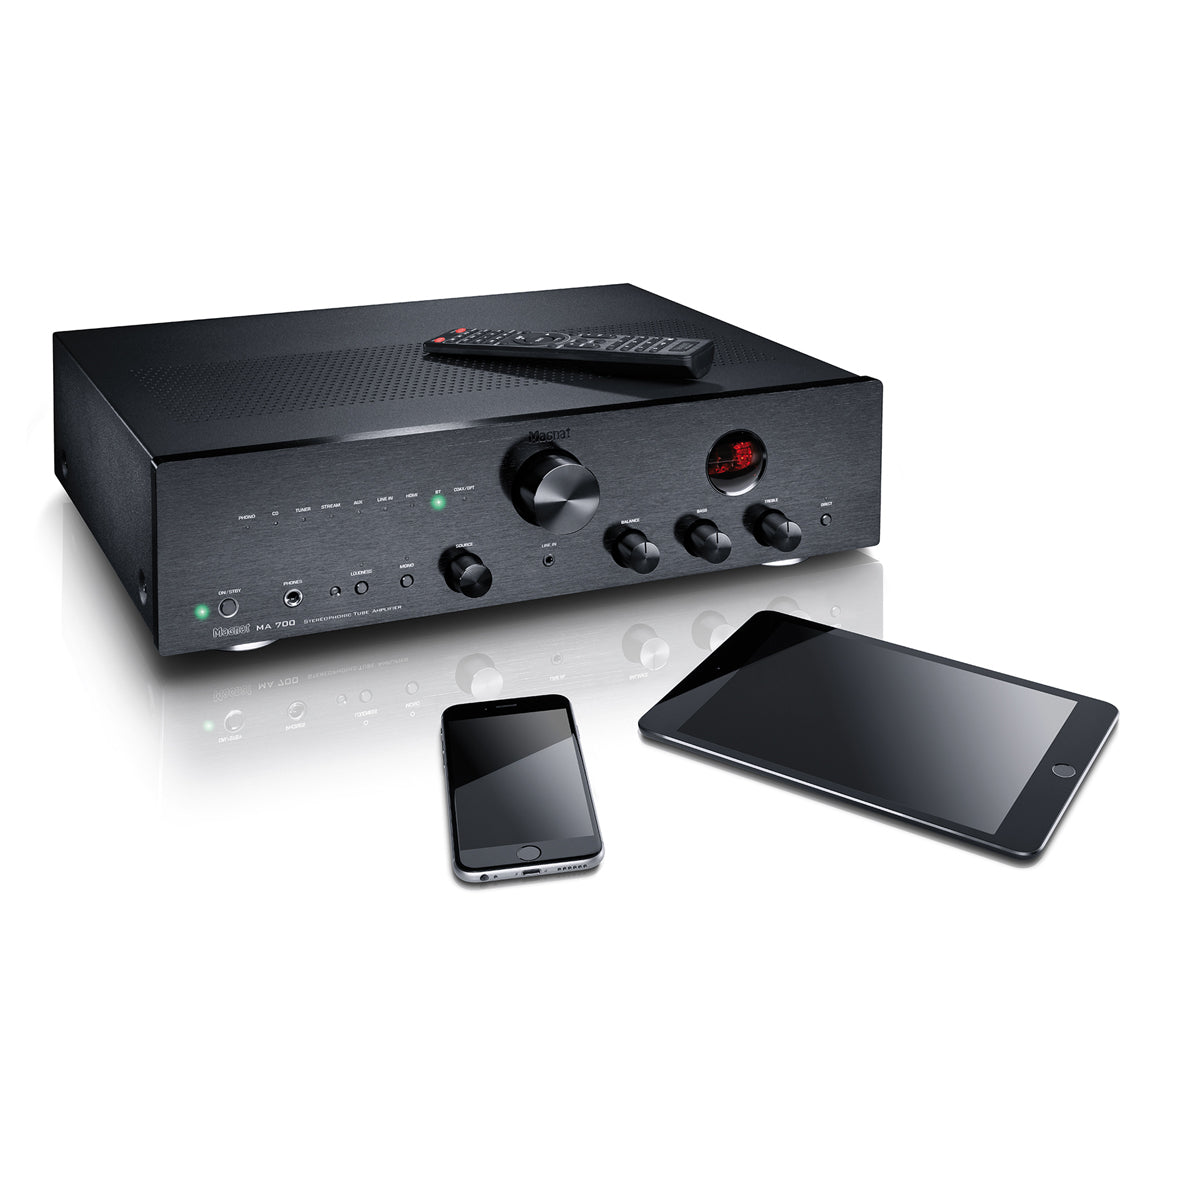 Magnat MA700 Stereo High-End Hybrid Integrated Amplifier